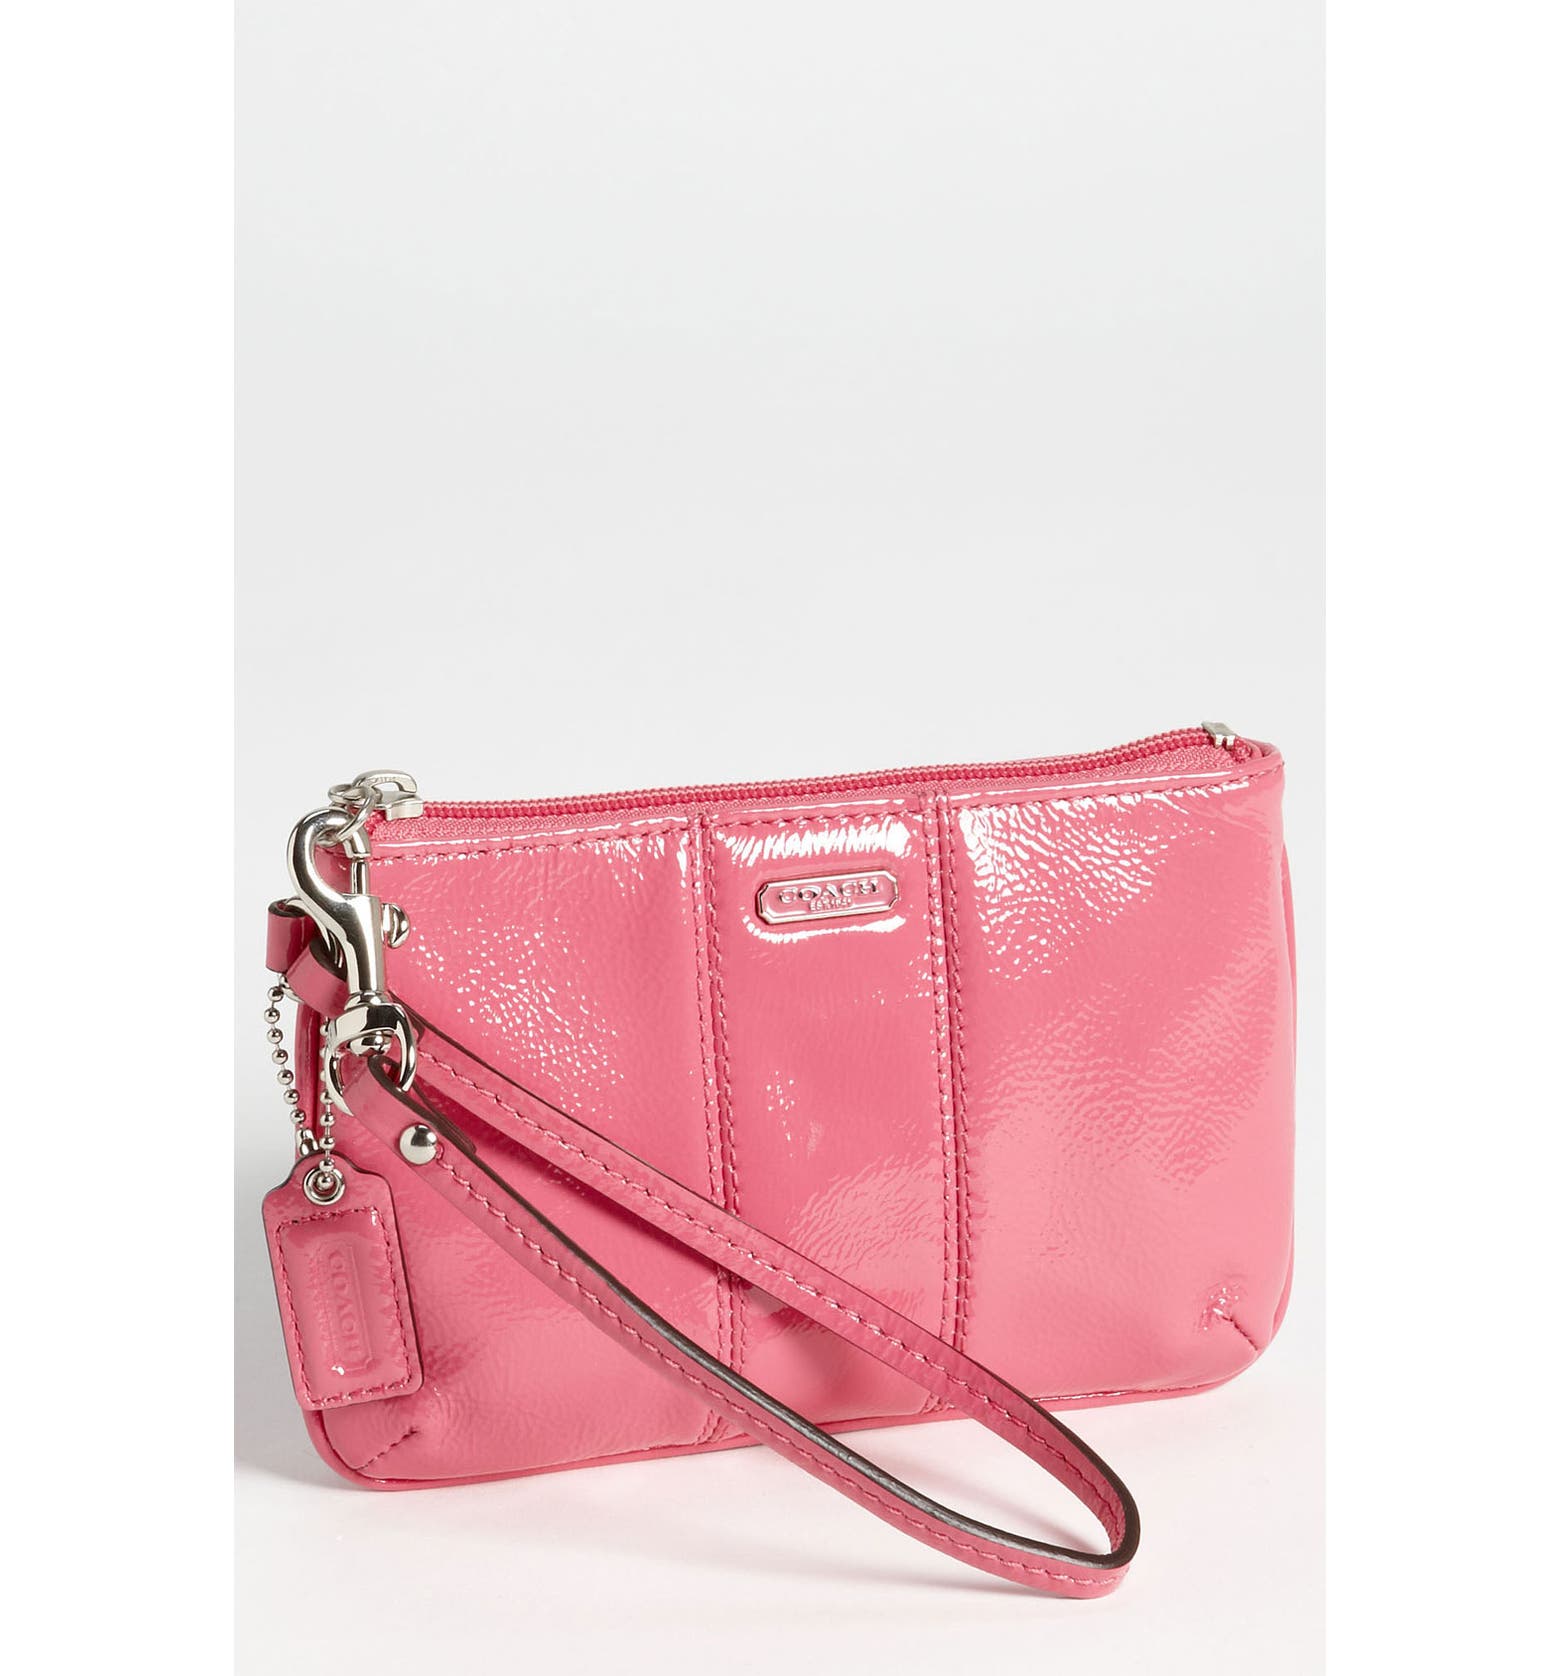 COACH 'Small' Patent Leather Wristlet | Nordstrom